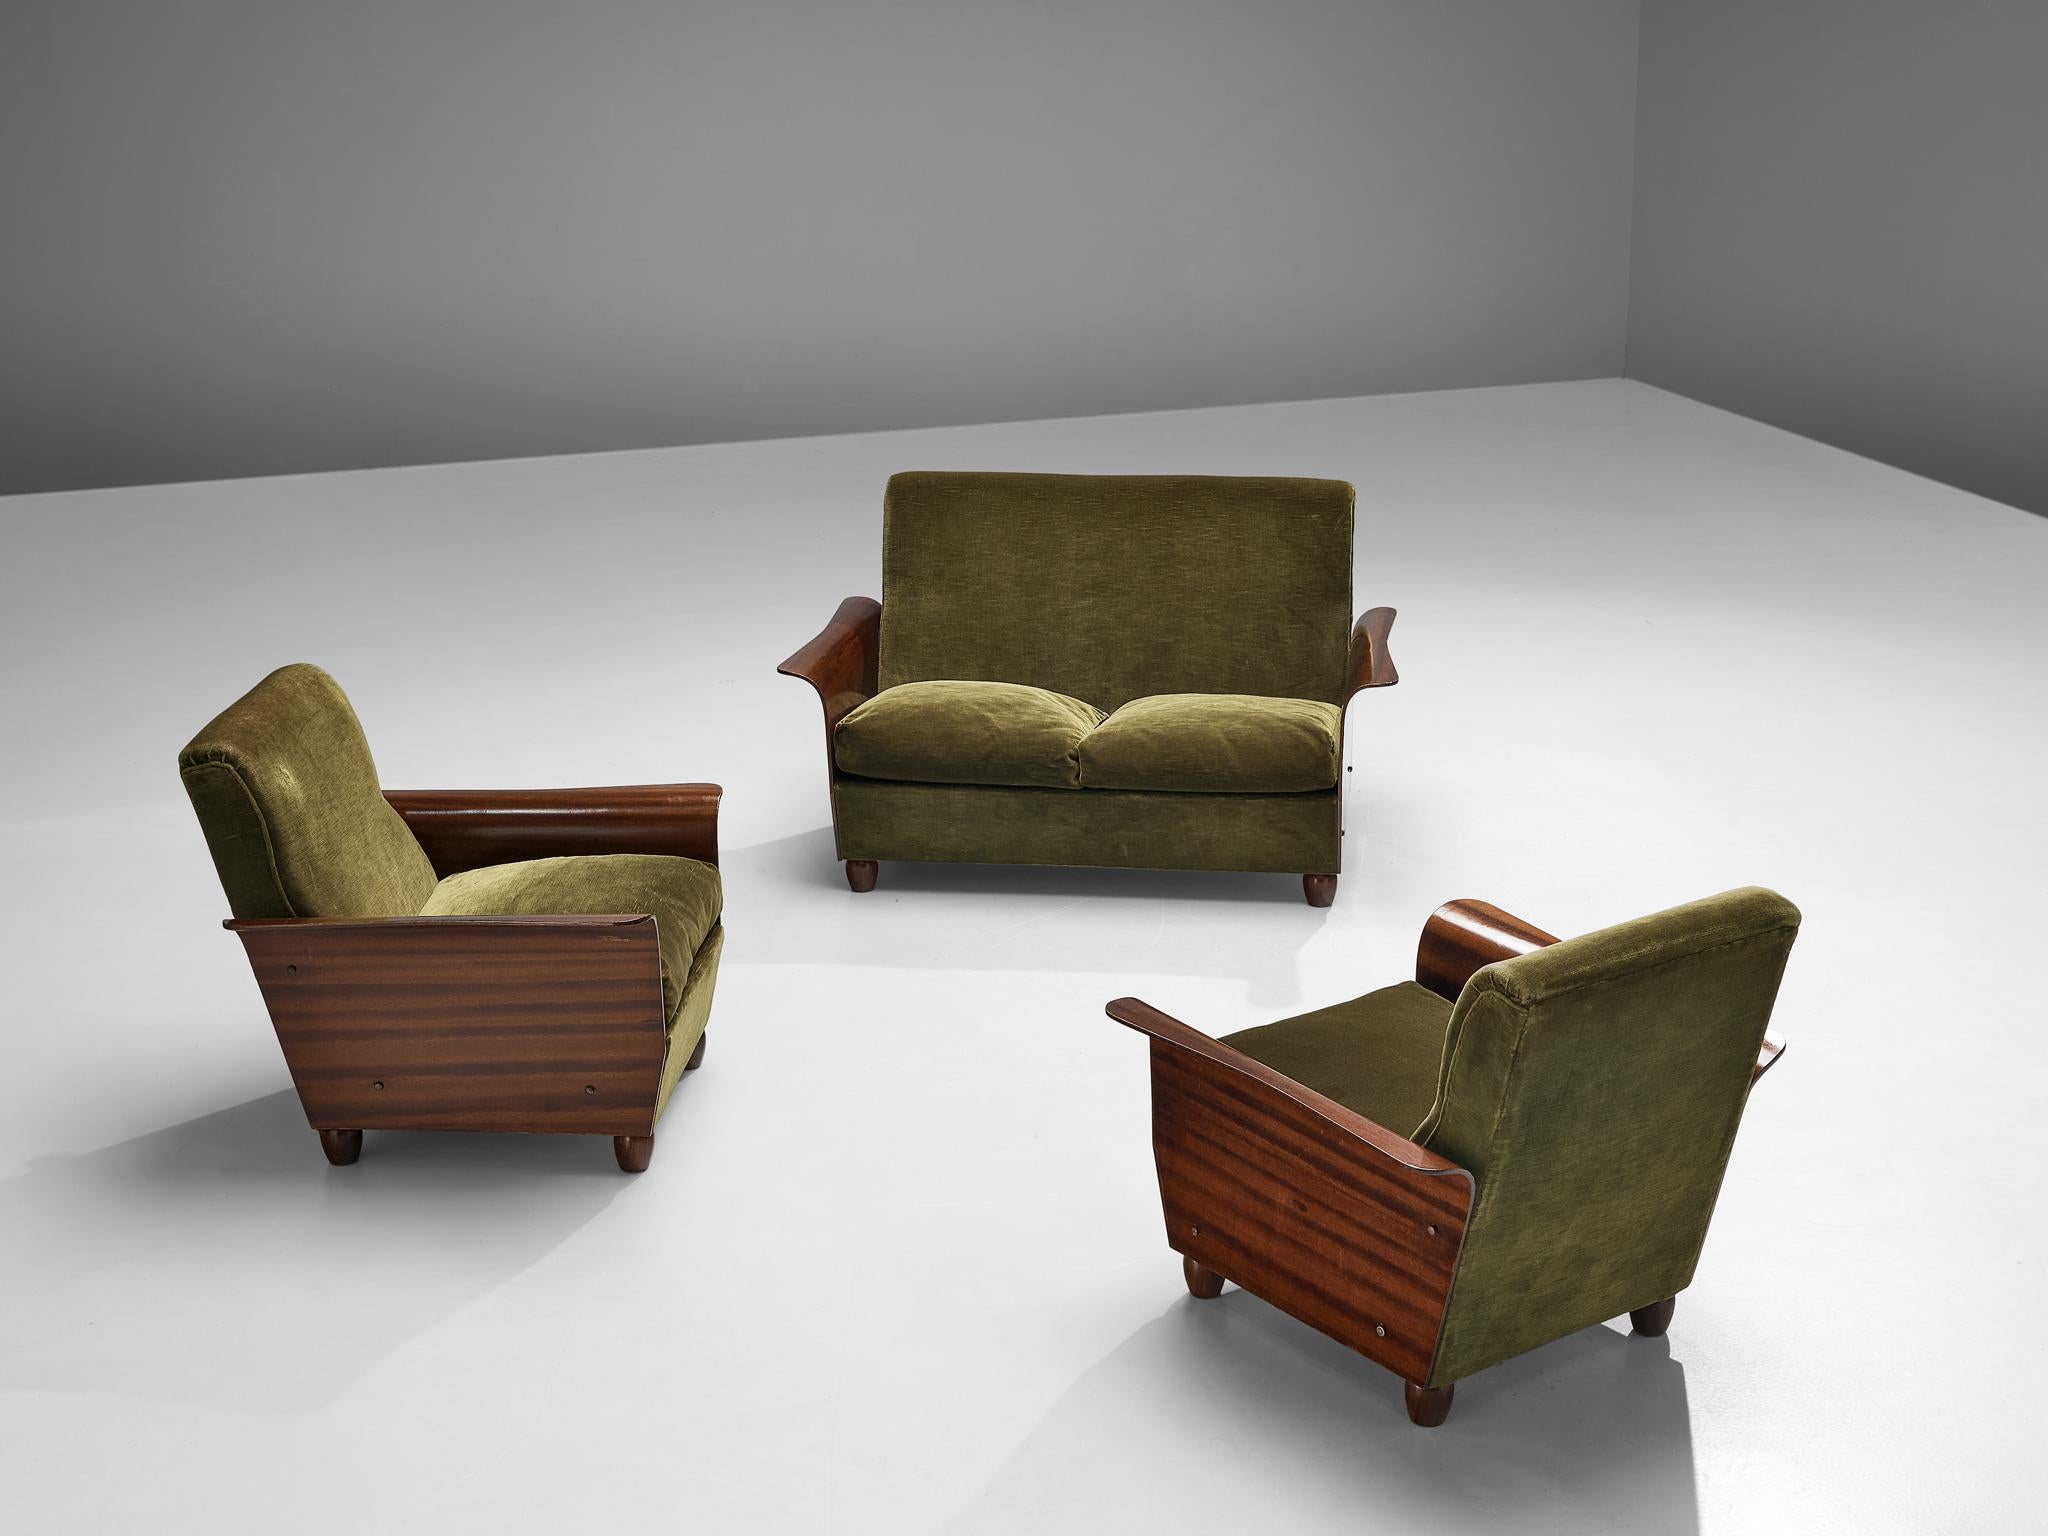 Exquisite Pair of Italian Lounge Chairs in Green Velvet Upholstery and Mahogany 3